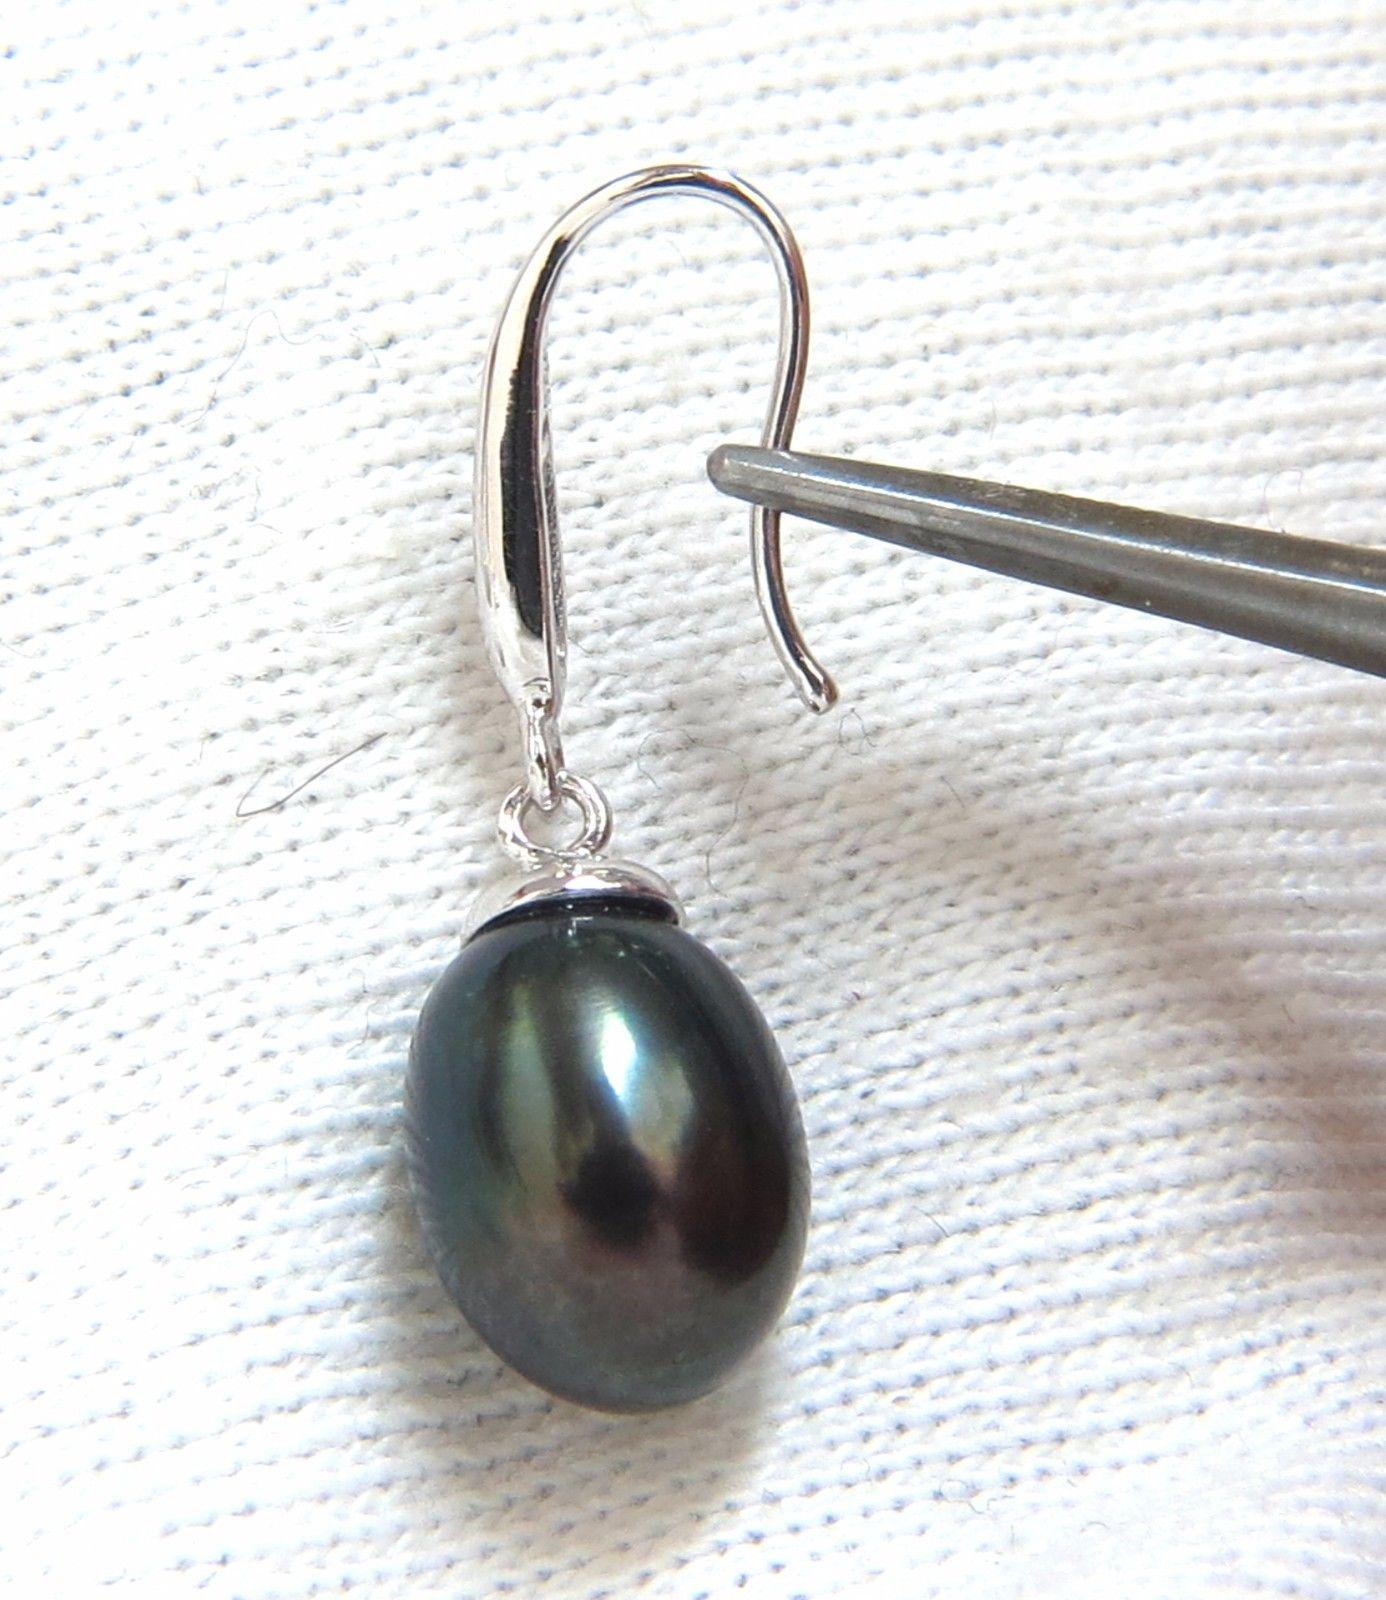 Black / Fresh water high luster pearl earrings.

11 x 8mm 

Wire Dangle

14kt. white gold

3 grams.

Total:  1 Inch Long